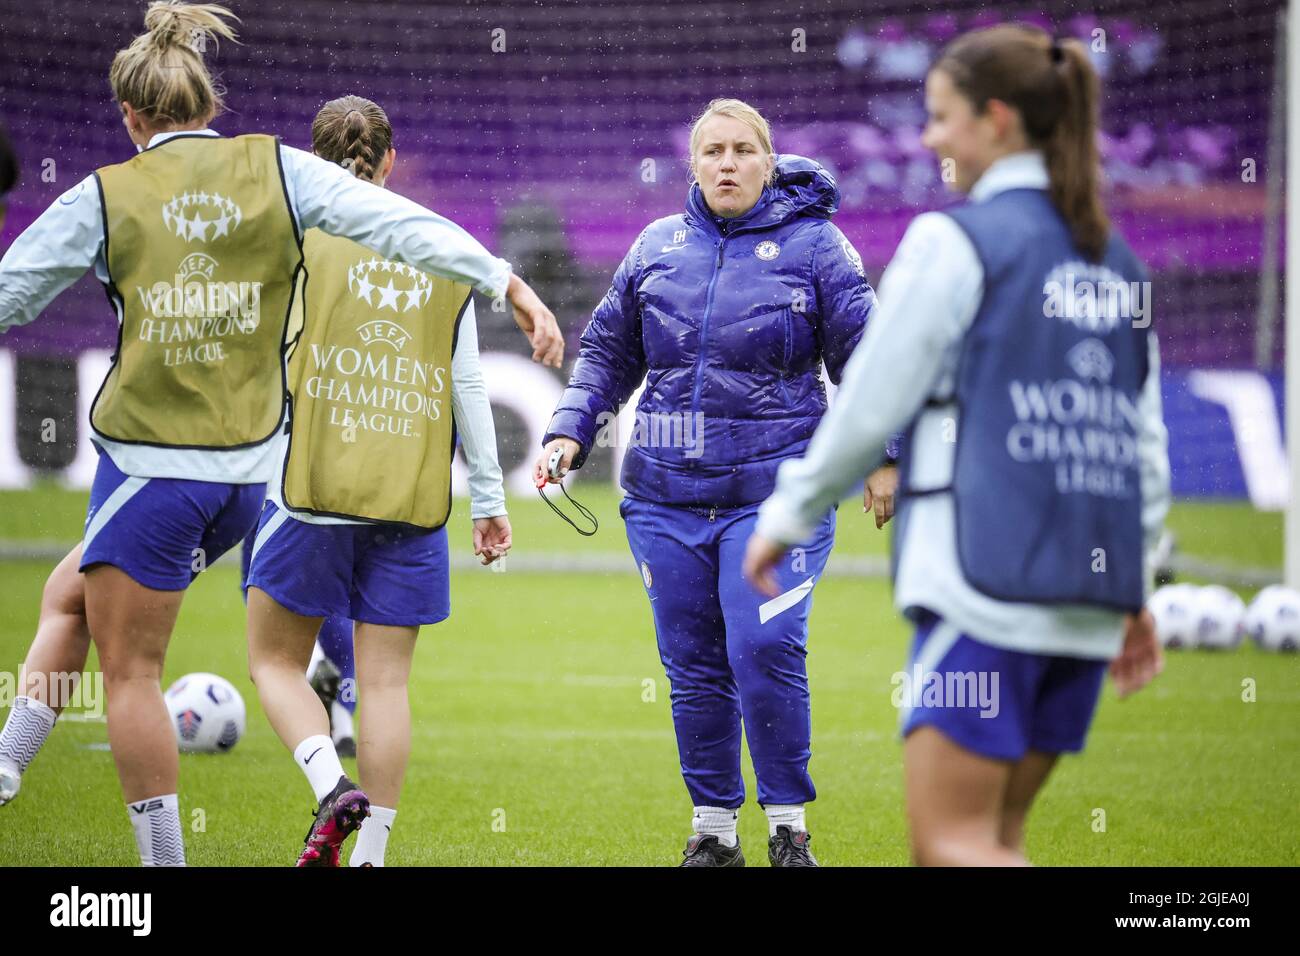 Chelsea S Head Coach Emma Hayes C In Action During A Training Session On The Eve Of The Uefa Women S Champions League Final Between Chelsea Fc And Fc Barcelona In Gothenburg Sweden On